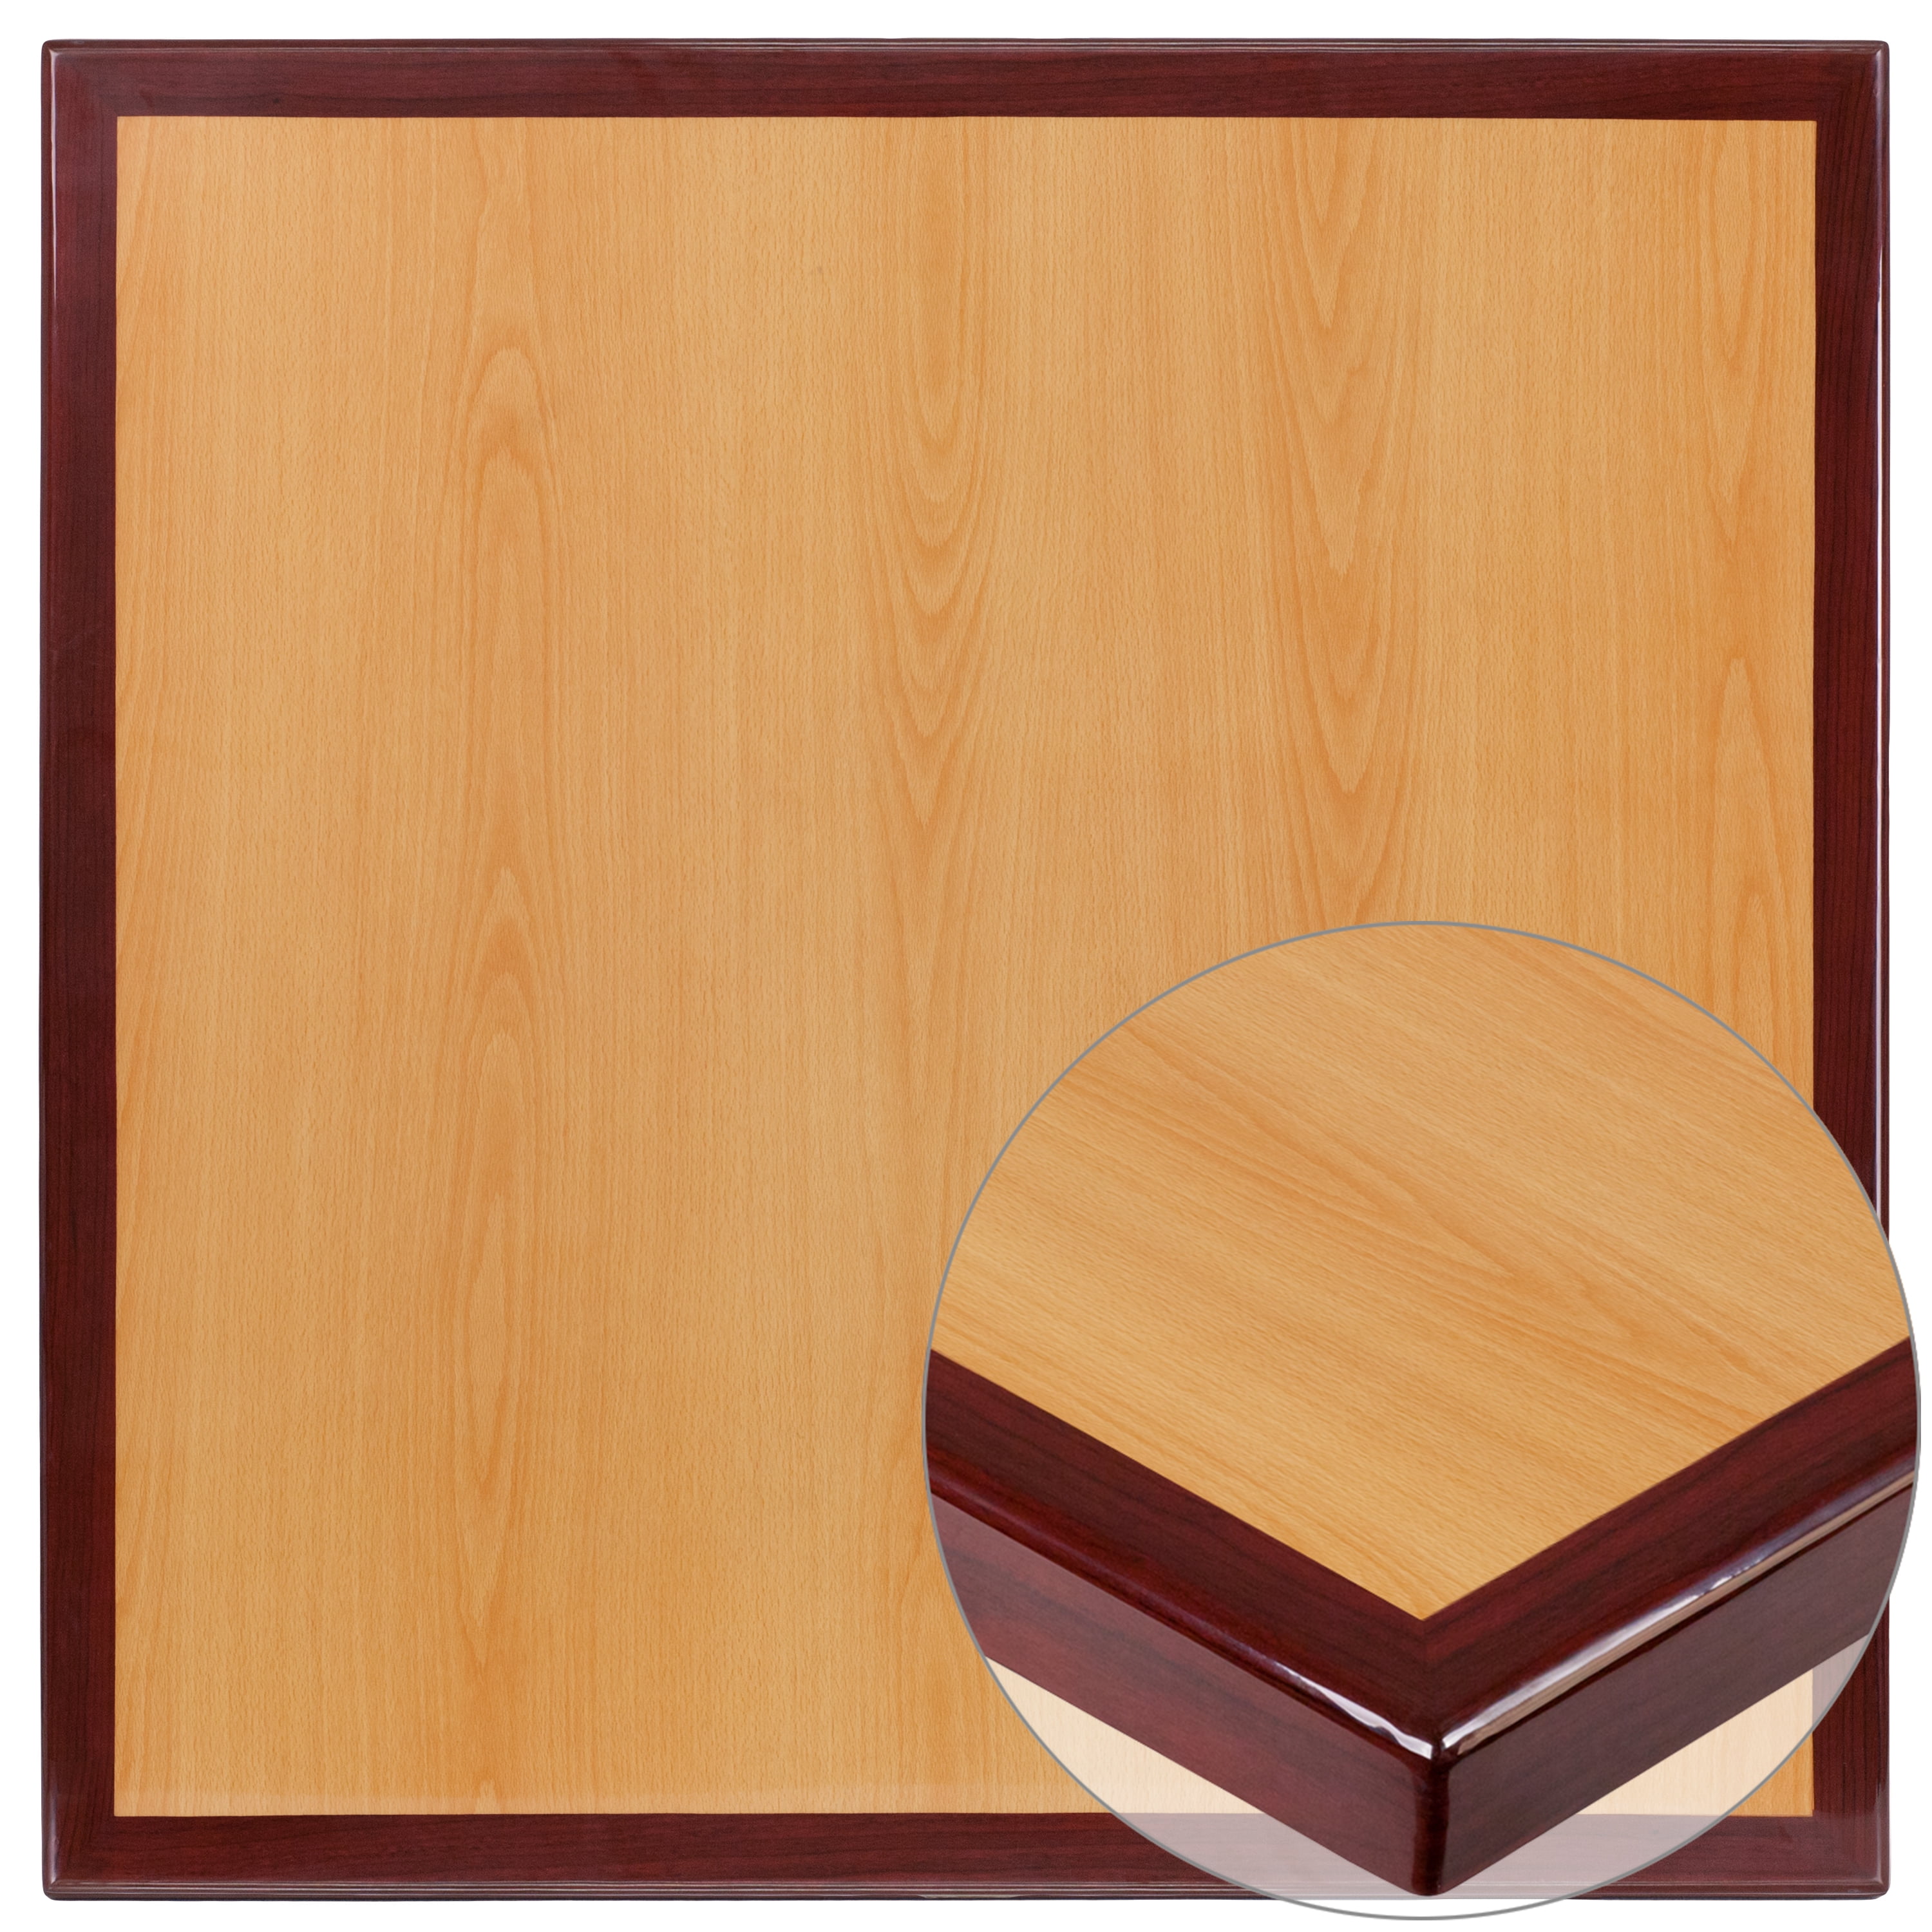 Details about   36  Round High-Gloss Walnut Resin Table Top With 2  Thick Drop-Lip 36 W X 36 